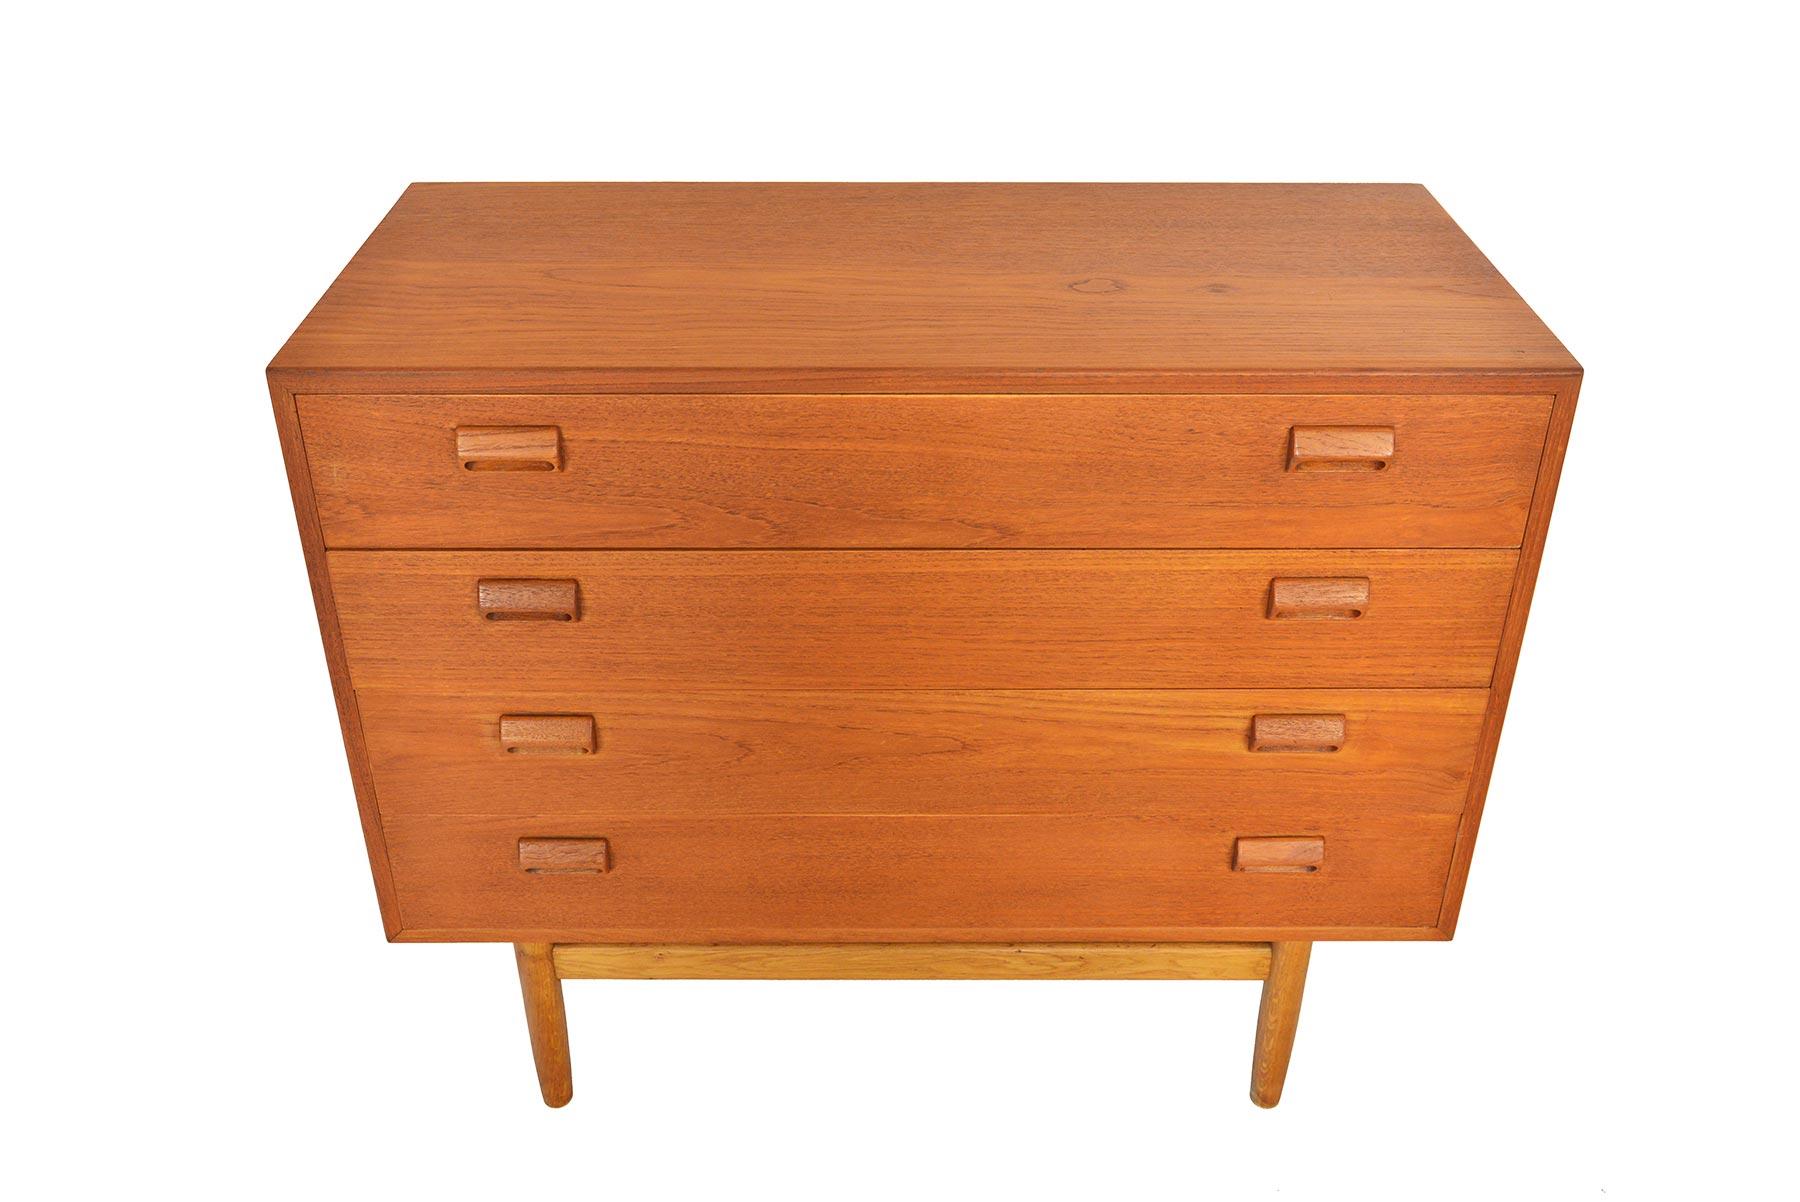 This beautiful gentleman's chest was designed by Børge Mogensen for Søborg Møbelfabrik in 1951. The case is expertly crafted in teak and stands on a solid oak base. Each drawer front is adorned with the designer's signature handles. Four deep